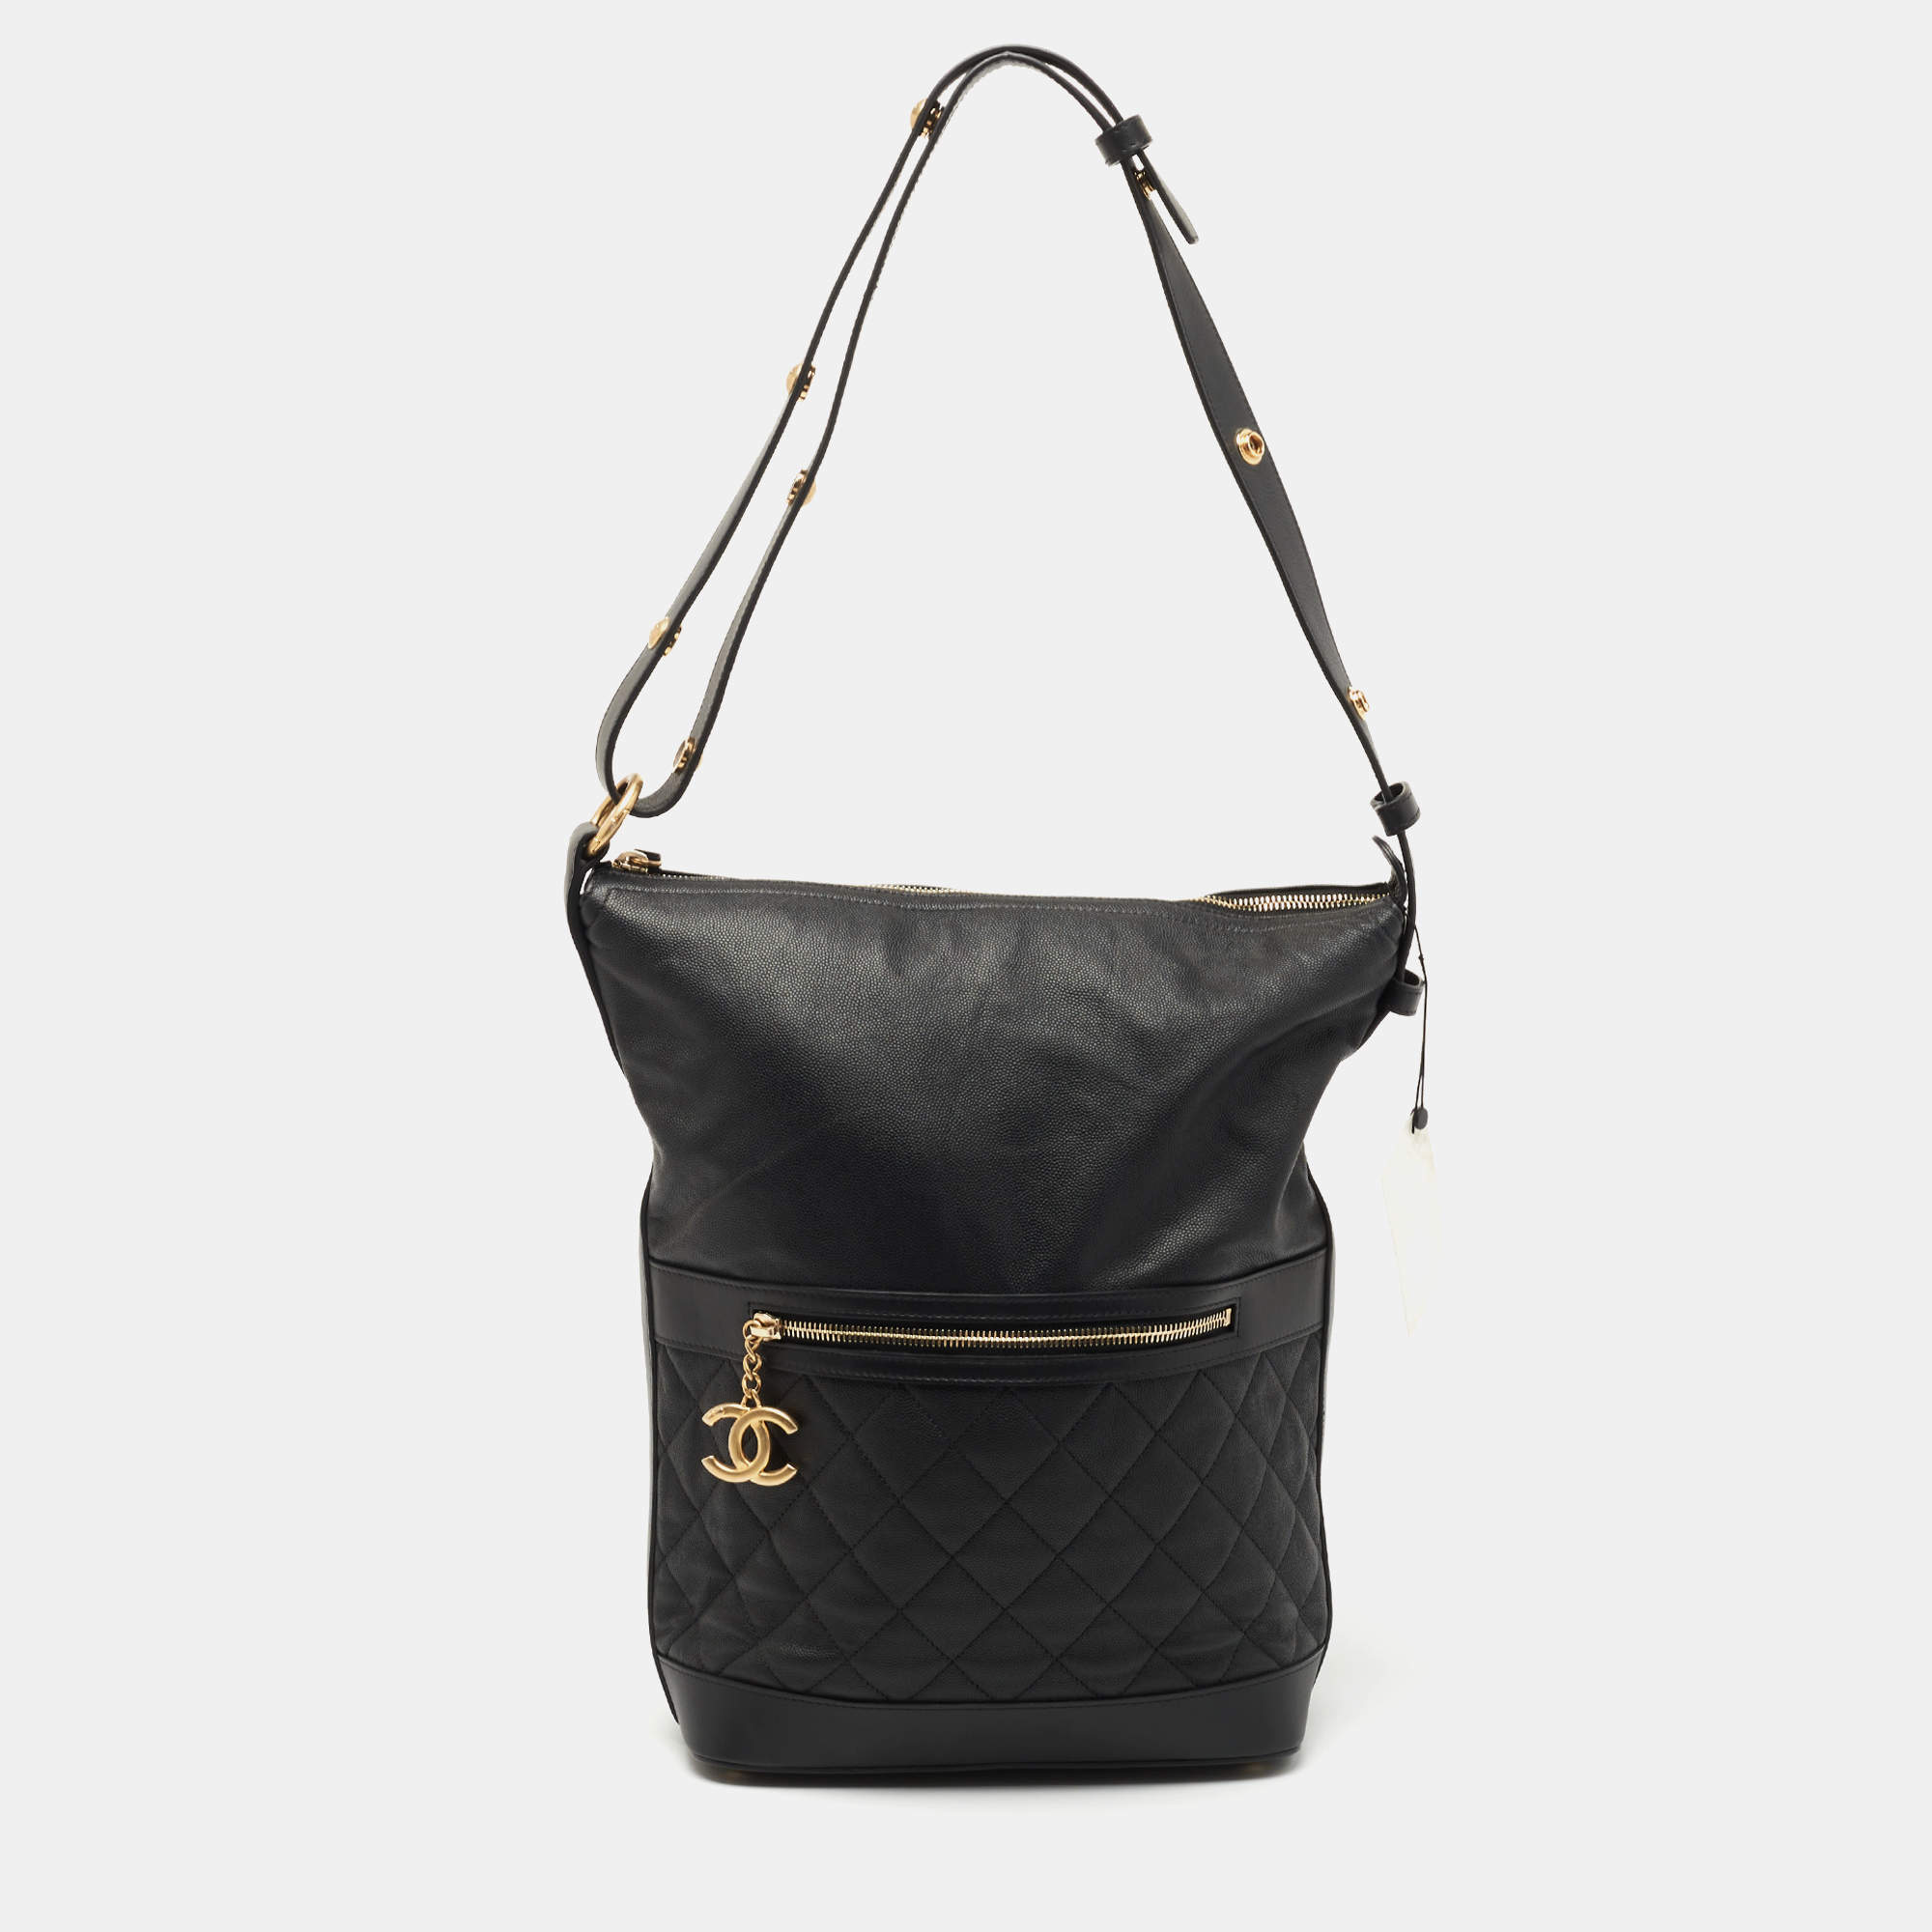 Chanel Black Quilted Caviar Leather Casual Style Hobo